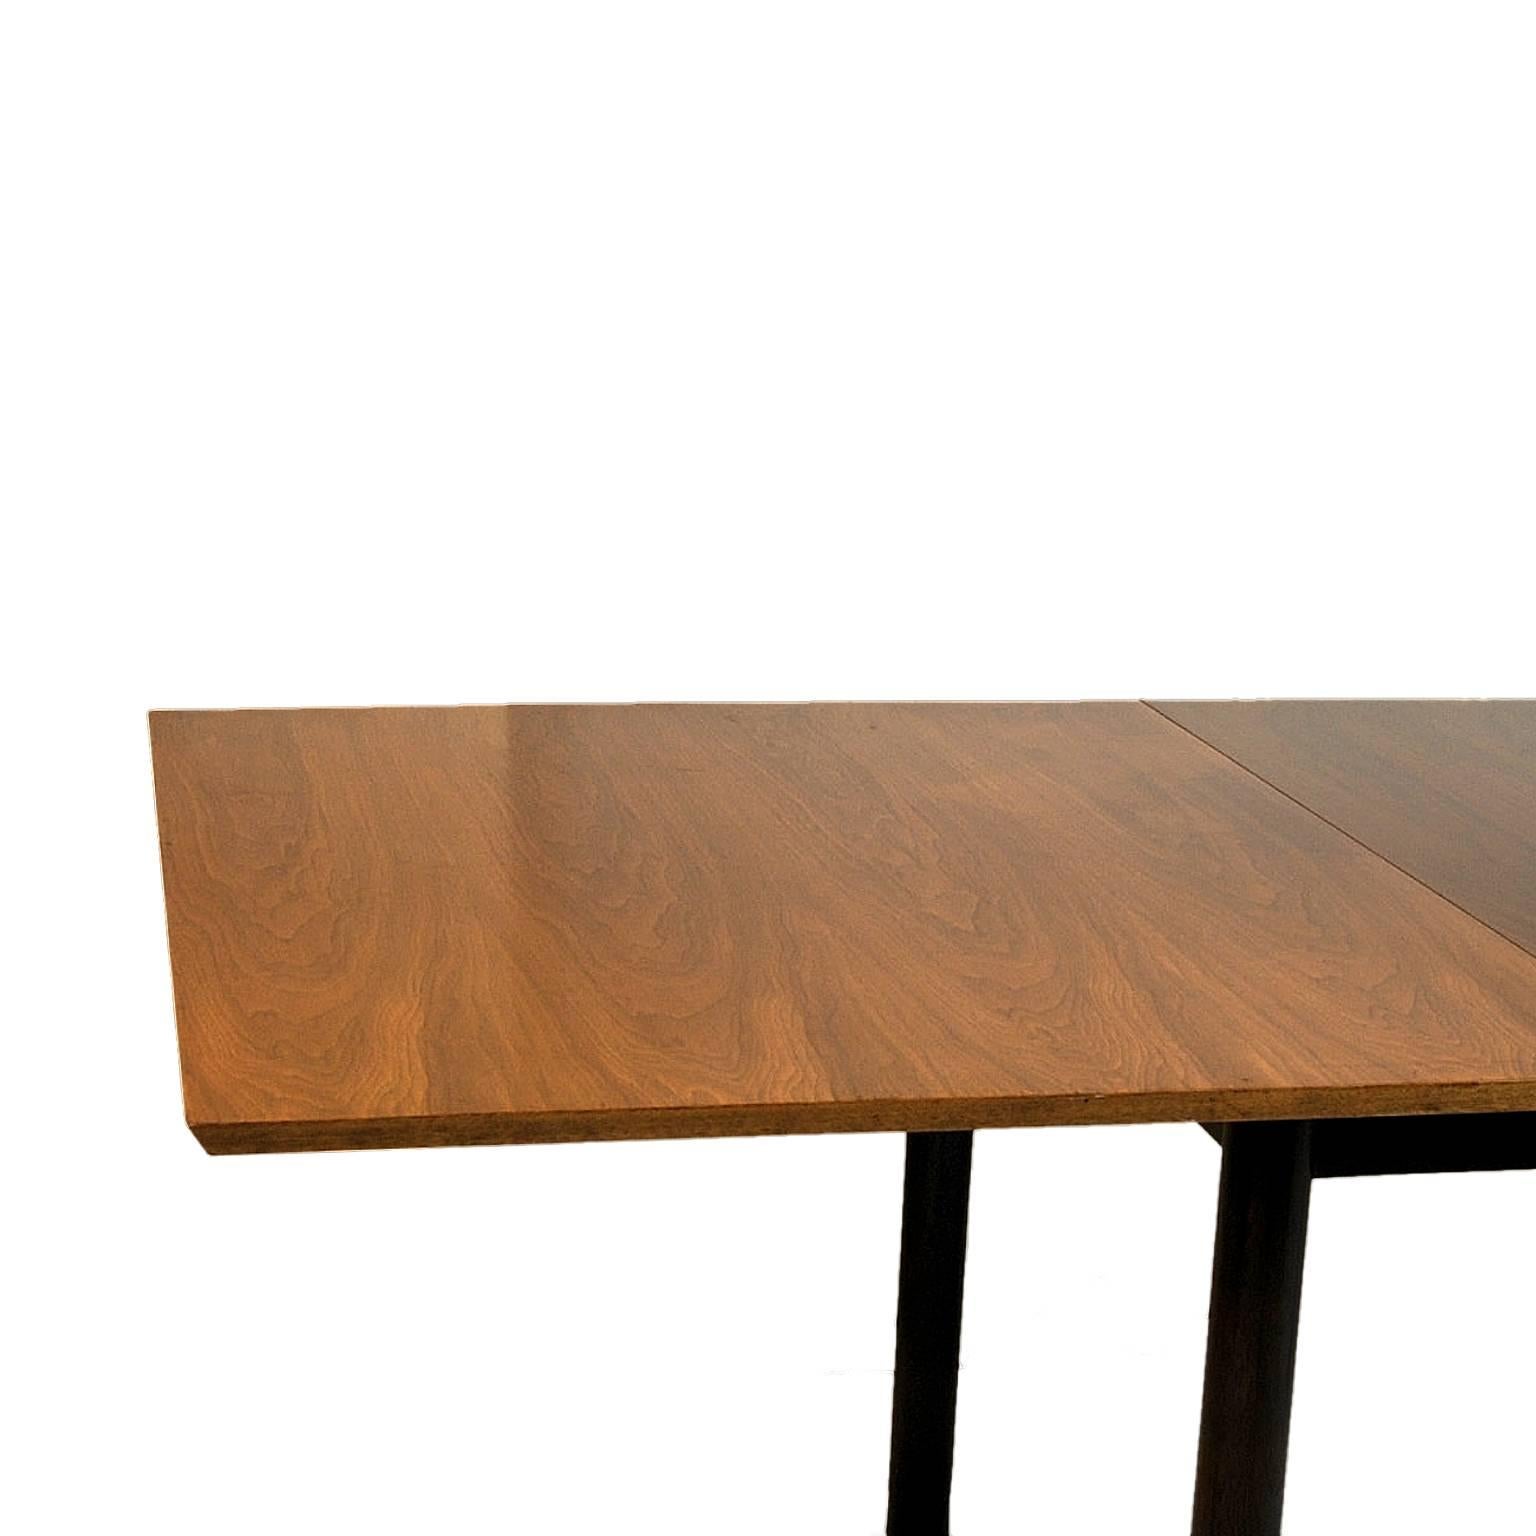 Edward Wormley for Dunbar Walnut Extension Dining Table w Leather Wrapped Feet 3